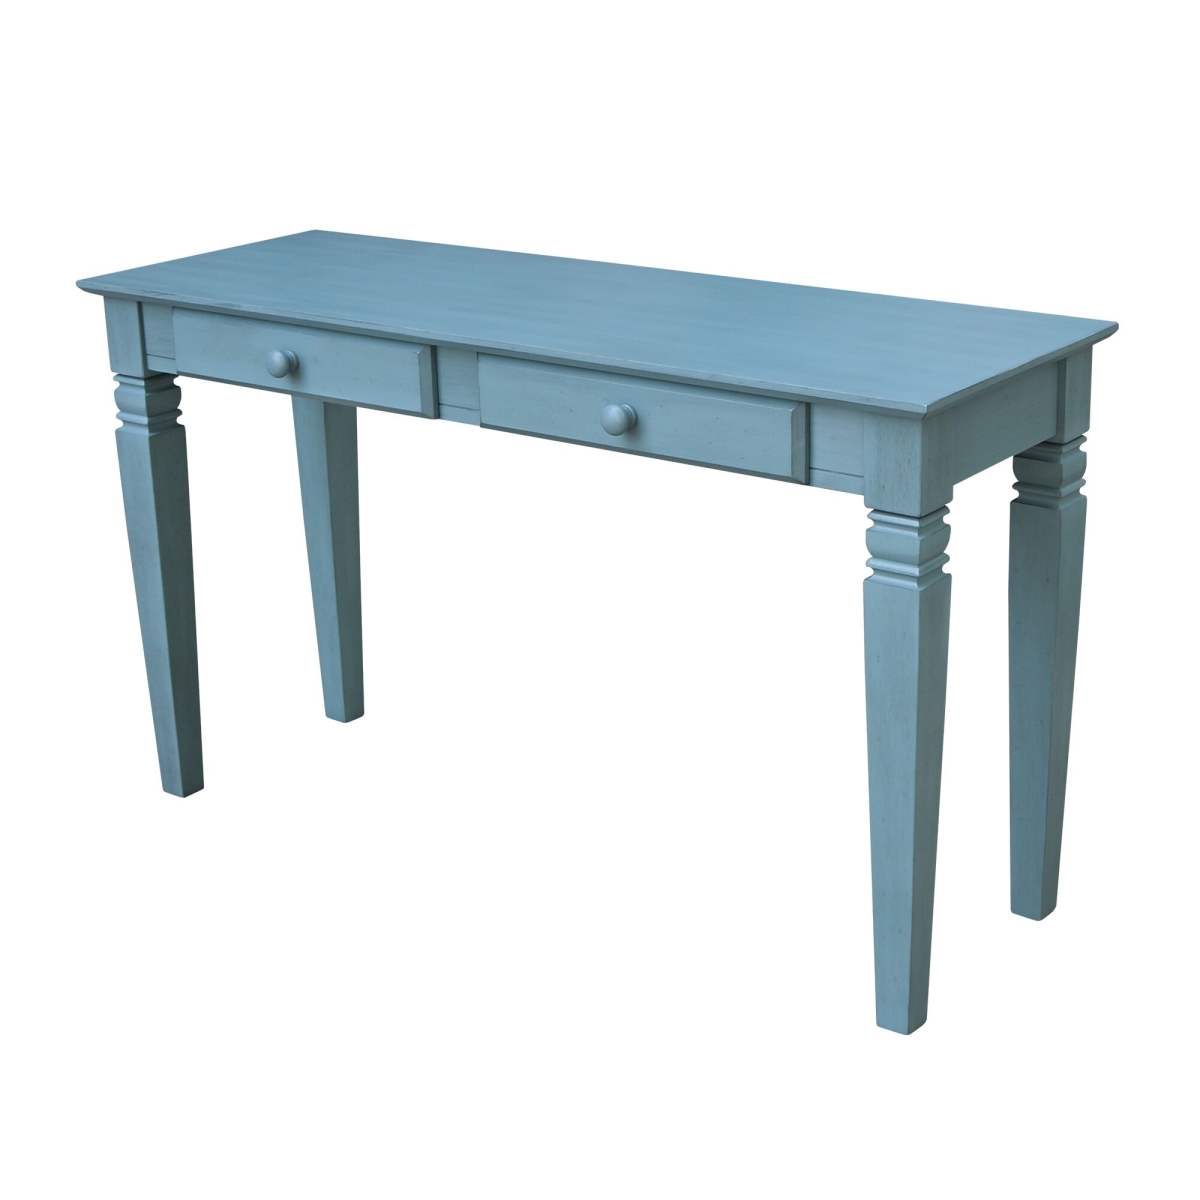 Ot32-60s2 Java Console Table With 2 Drawers, Ocean Blue - Antique Rubbed